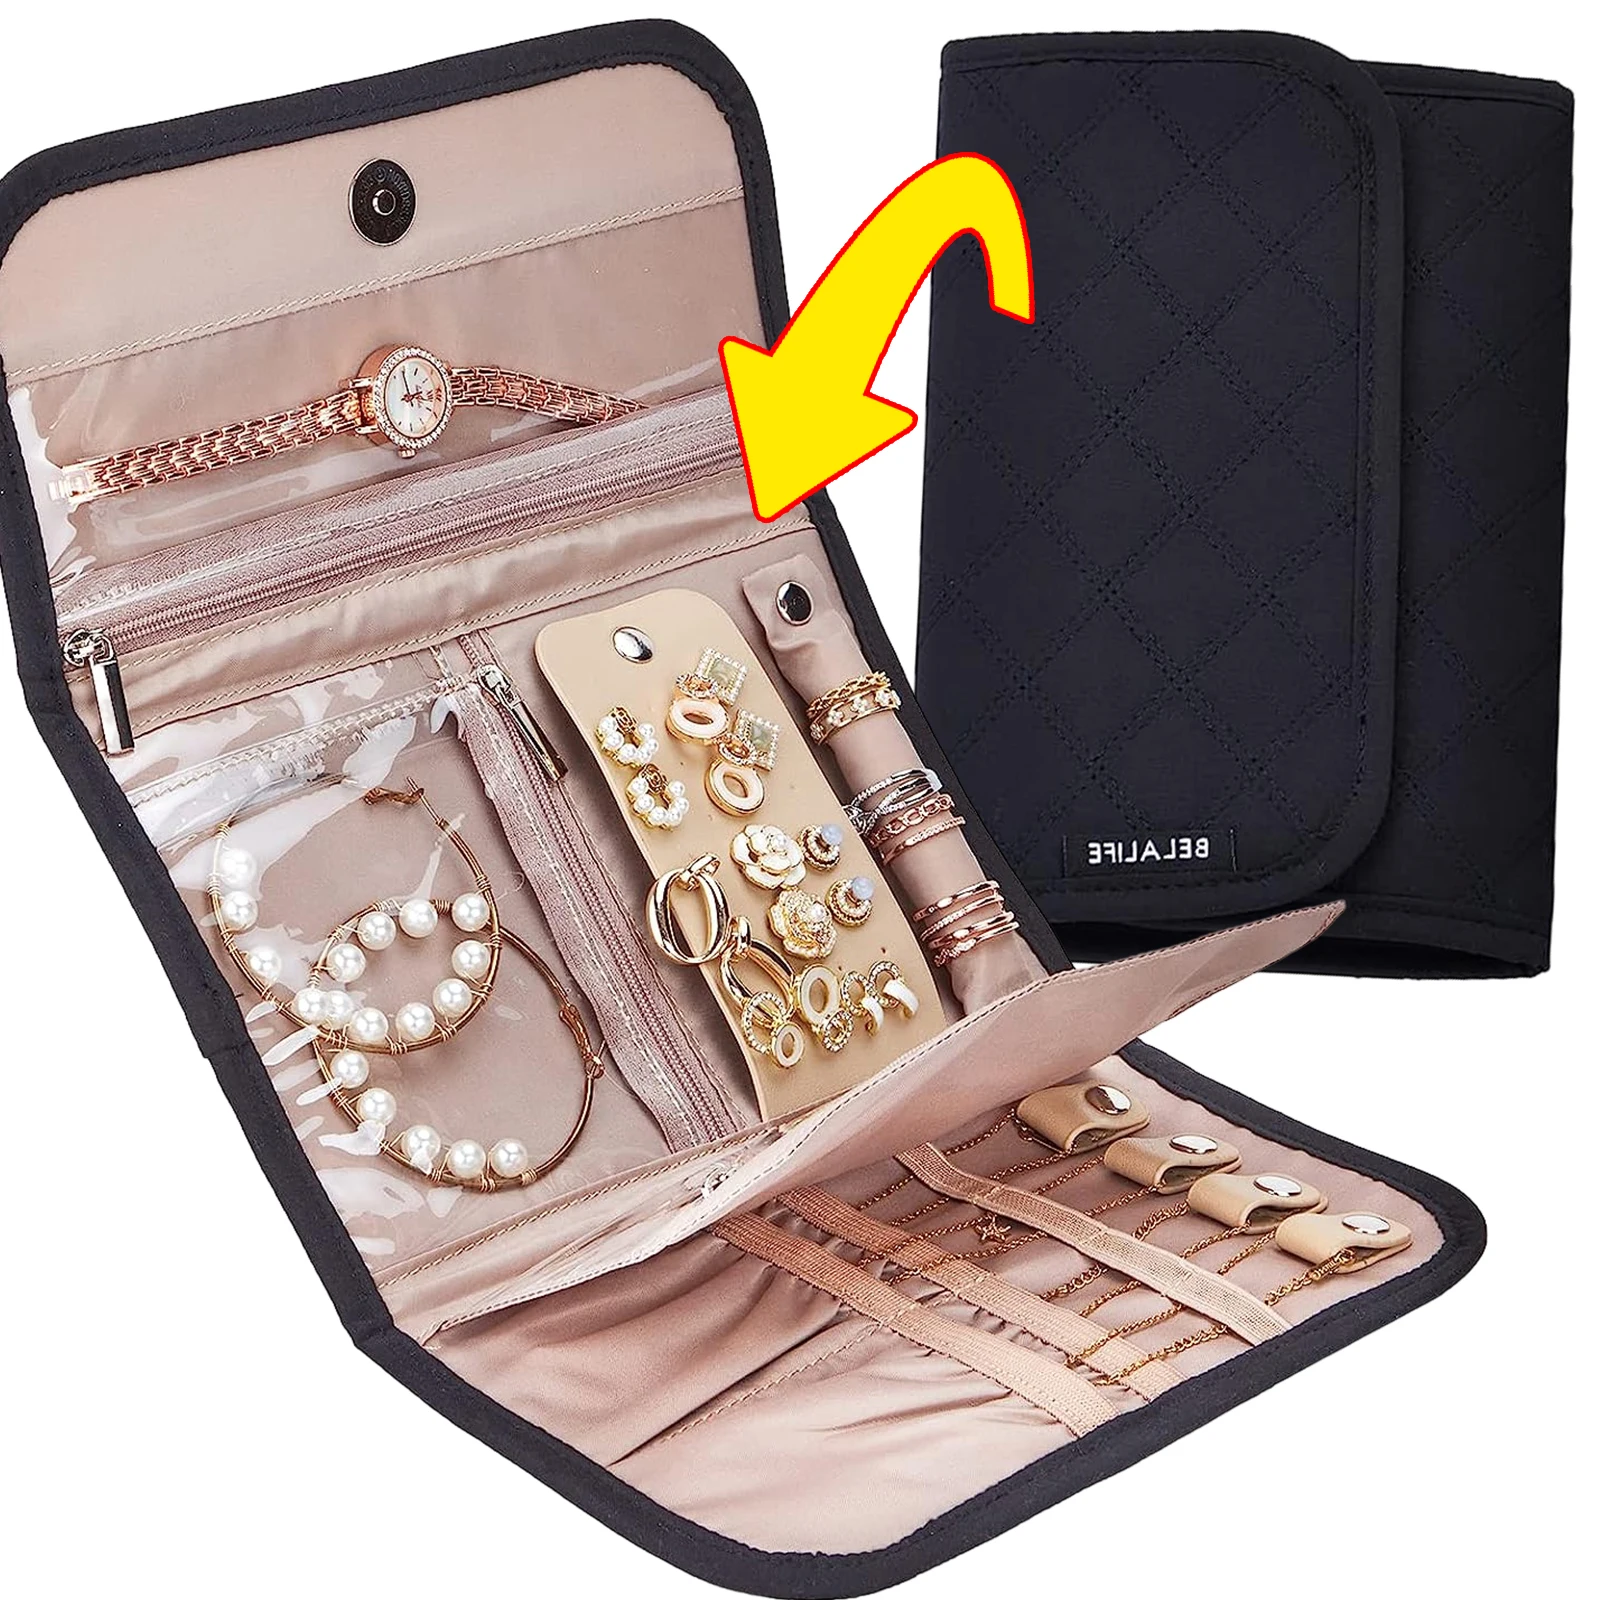 Roll Foldable Jewelry Case Travel Jewelry Organizer Portable for Journey Earrings Rings Diamond Necklaces Brooches Storage Bag pcs portable jewelry price tags self adhesive barbell stickers kraft paper labels rings bracelet jewelry tags